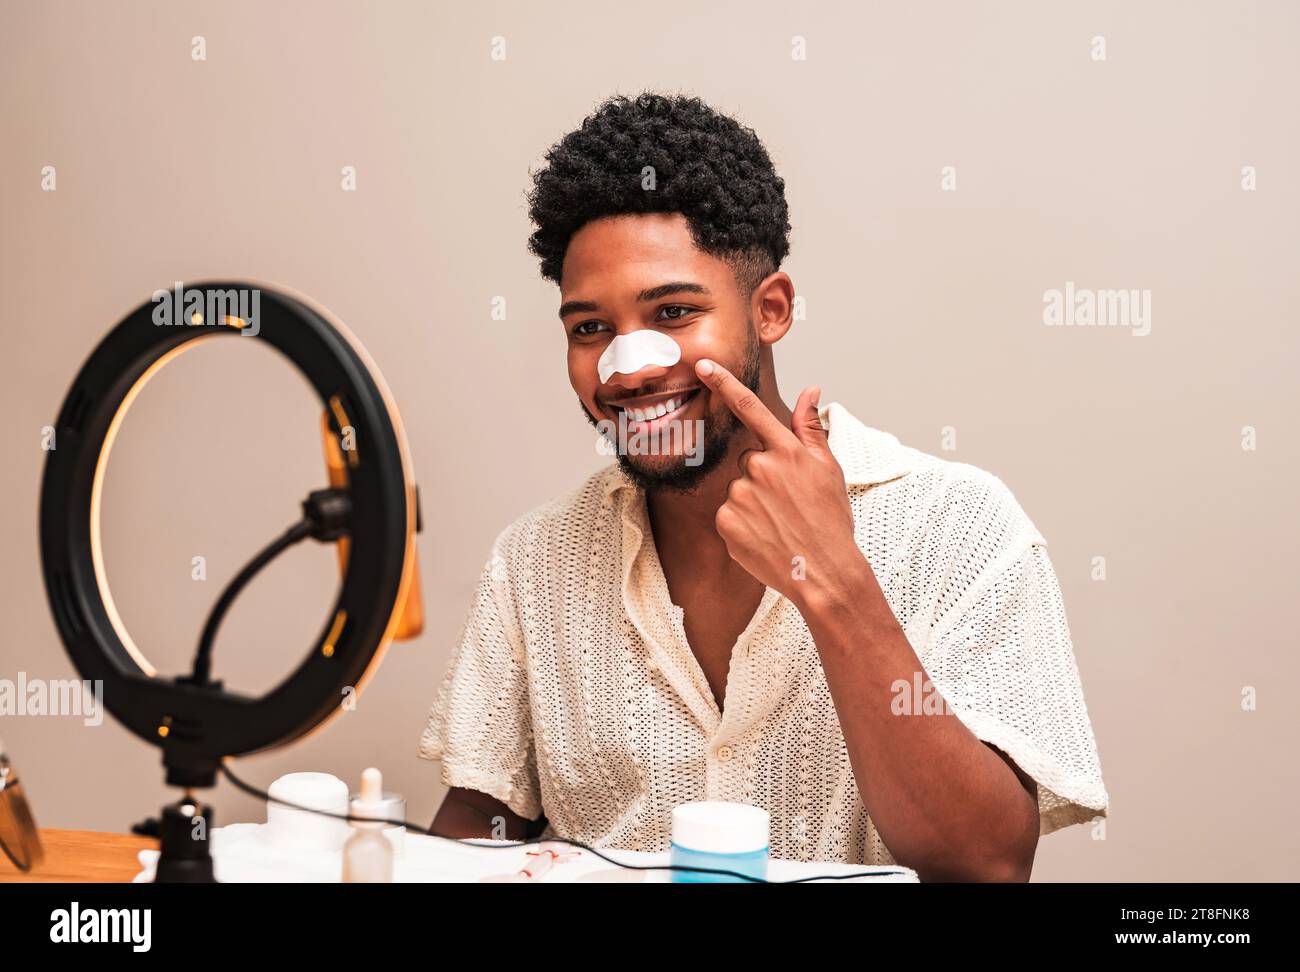 A cheerful young latin man applies a white nose pore strip while sitting at a table with skincare products and a ring light illuminating his face. Stock Photo